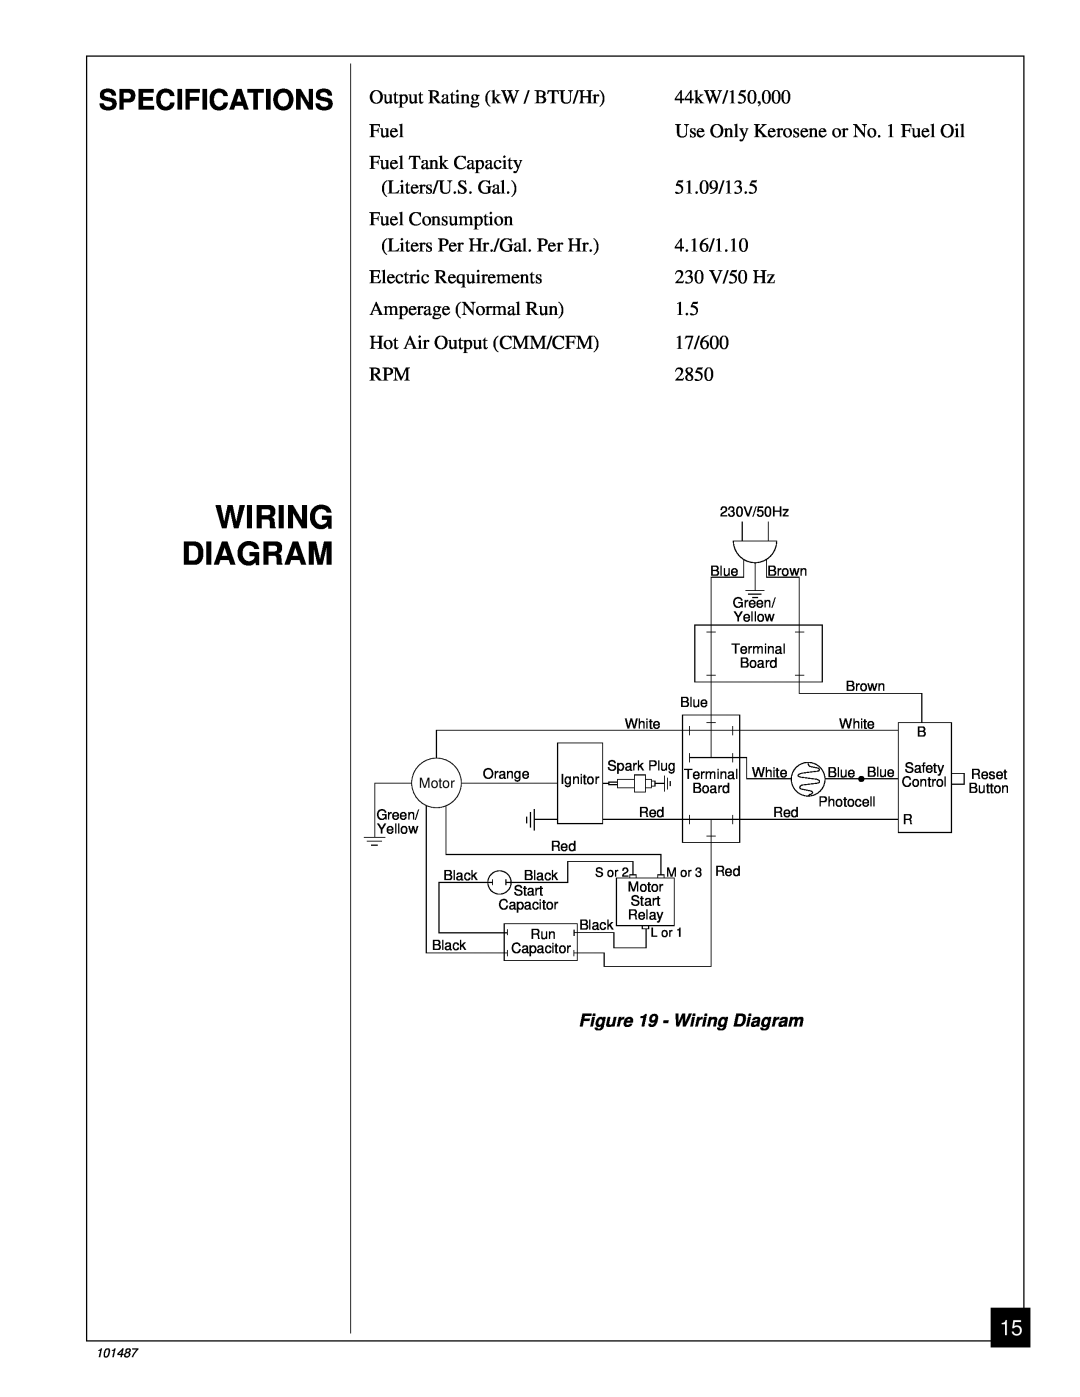 Master Lock BH150CE owner manual Wiring Diagram, Specifications 